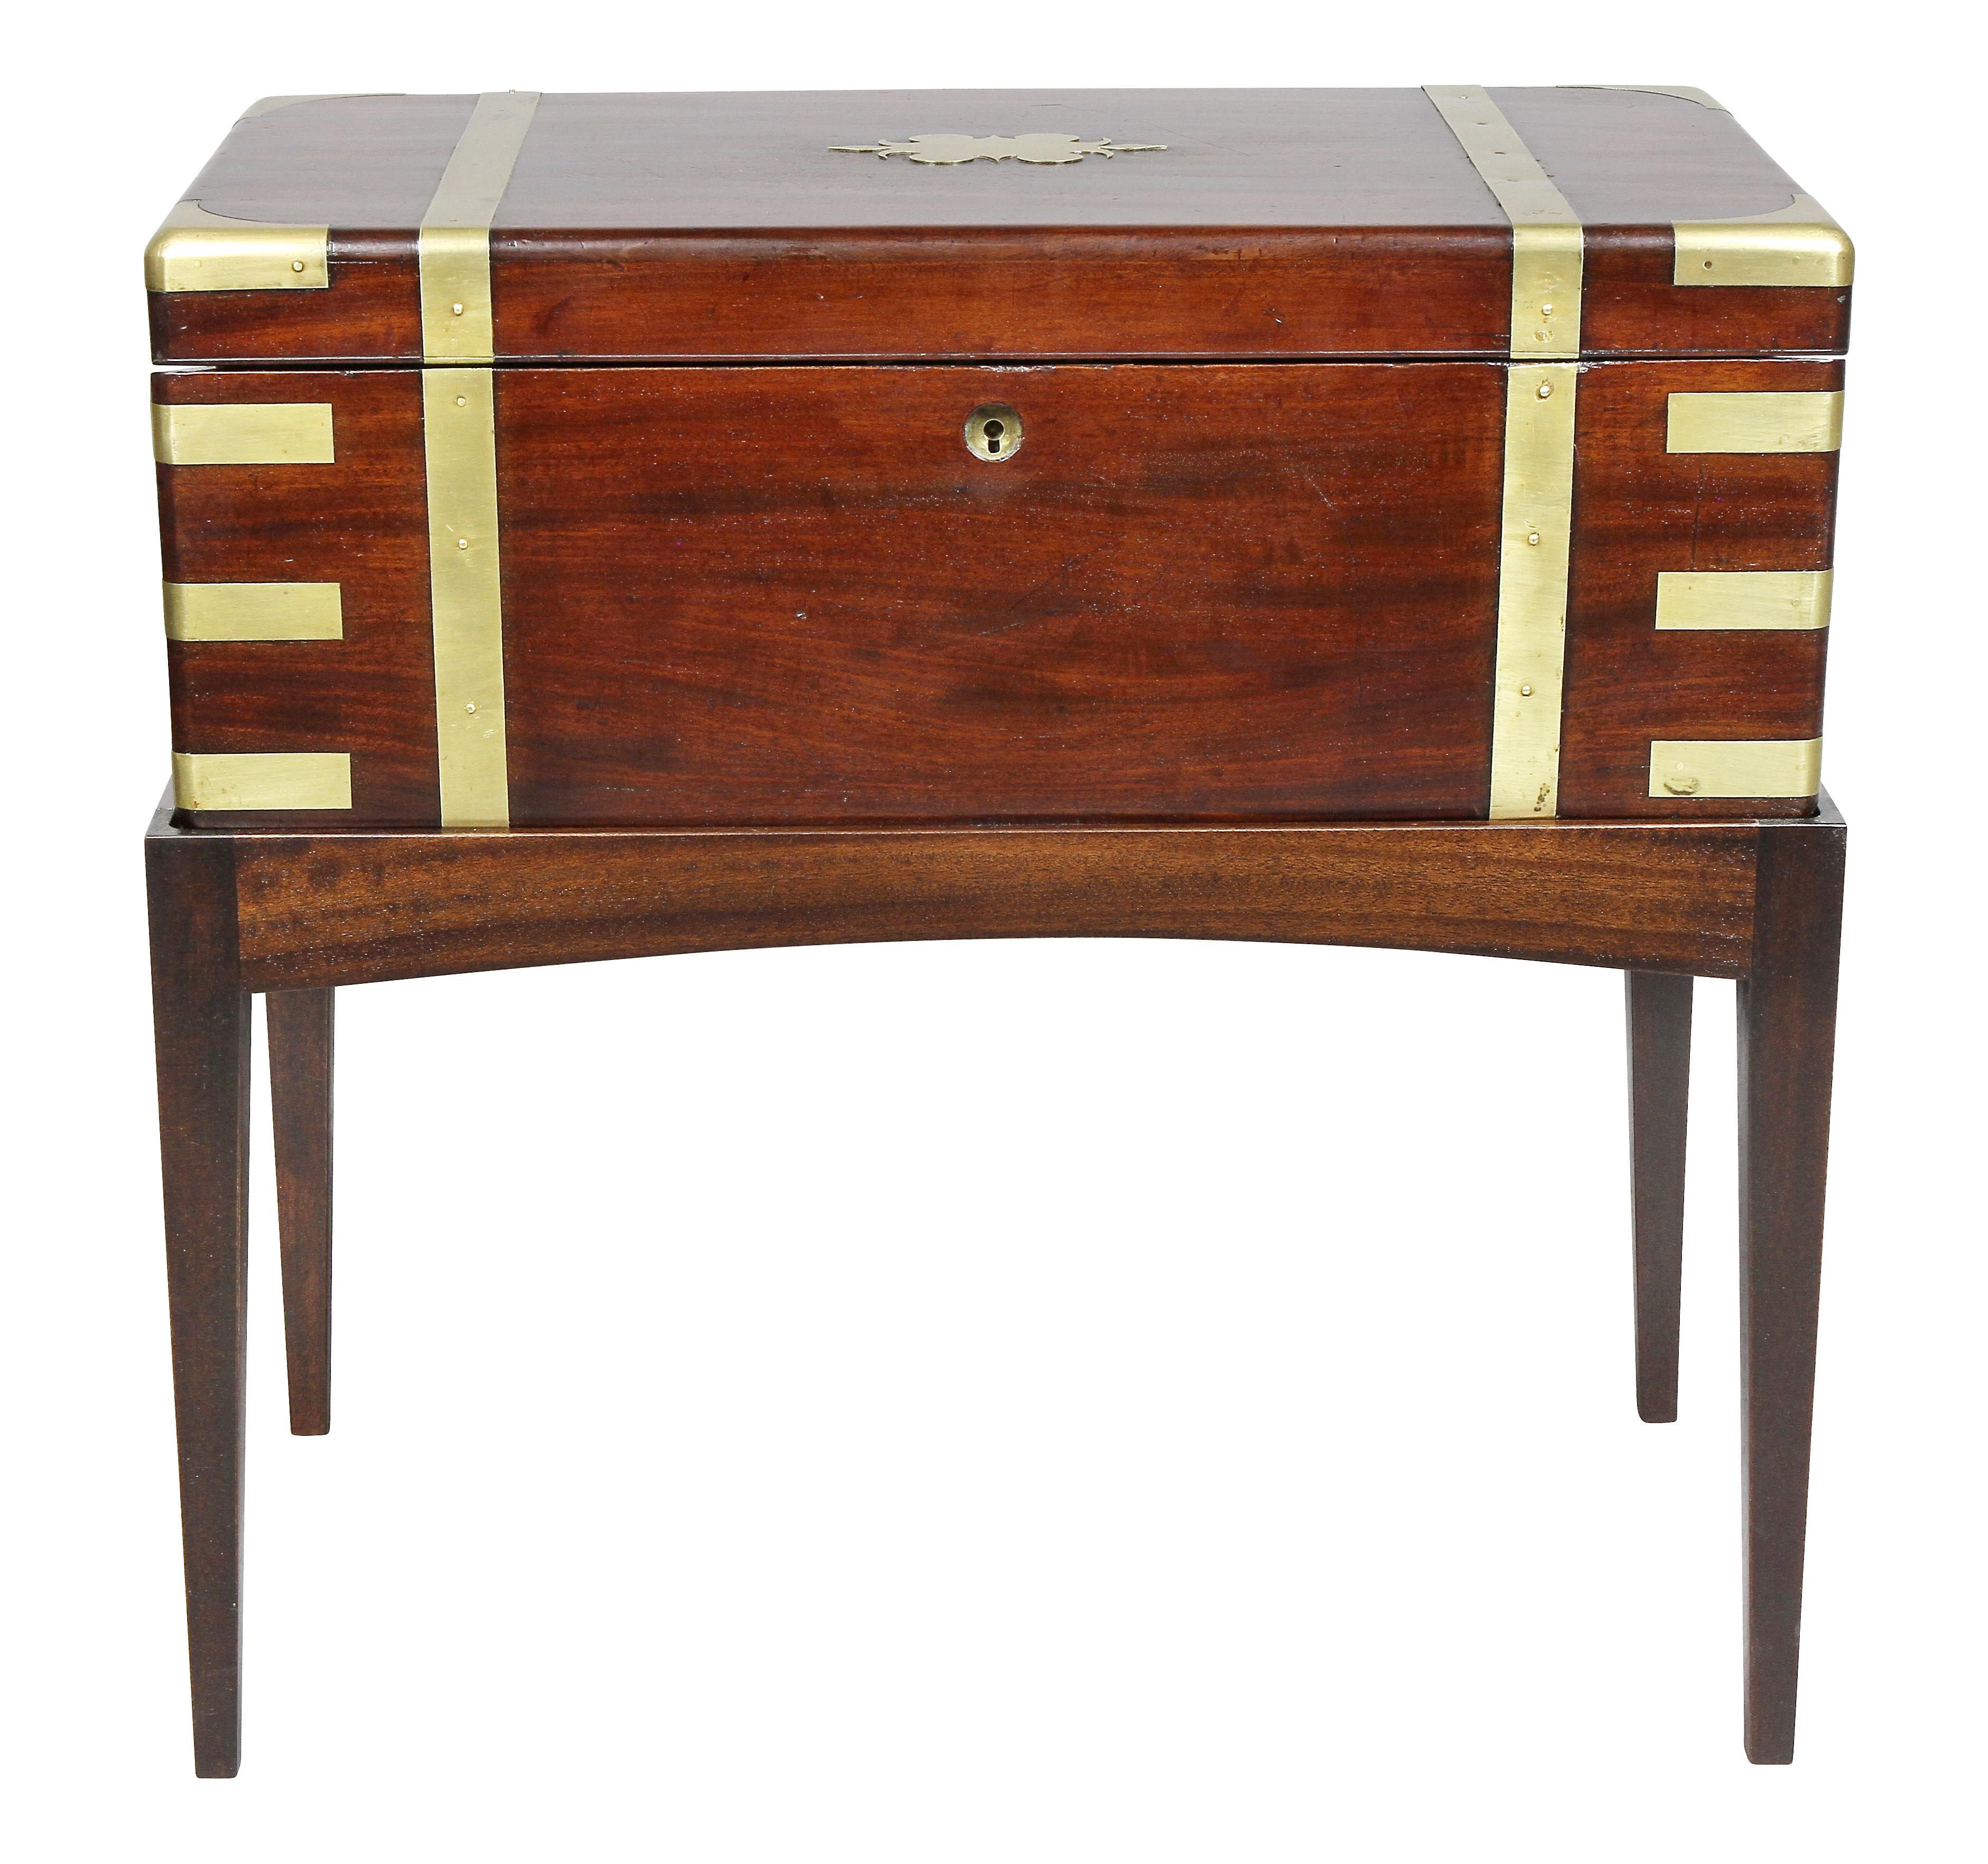 Typical form mounted with brass details and strapping, hinged top fitted with desk interior, later mahogany base.